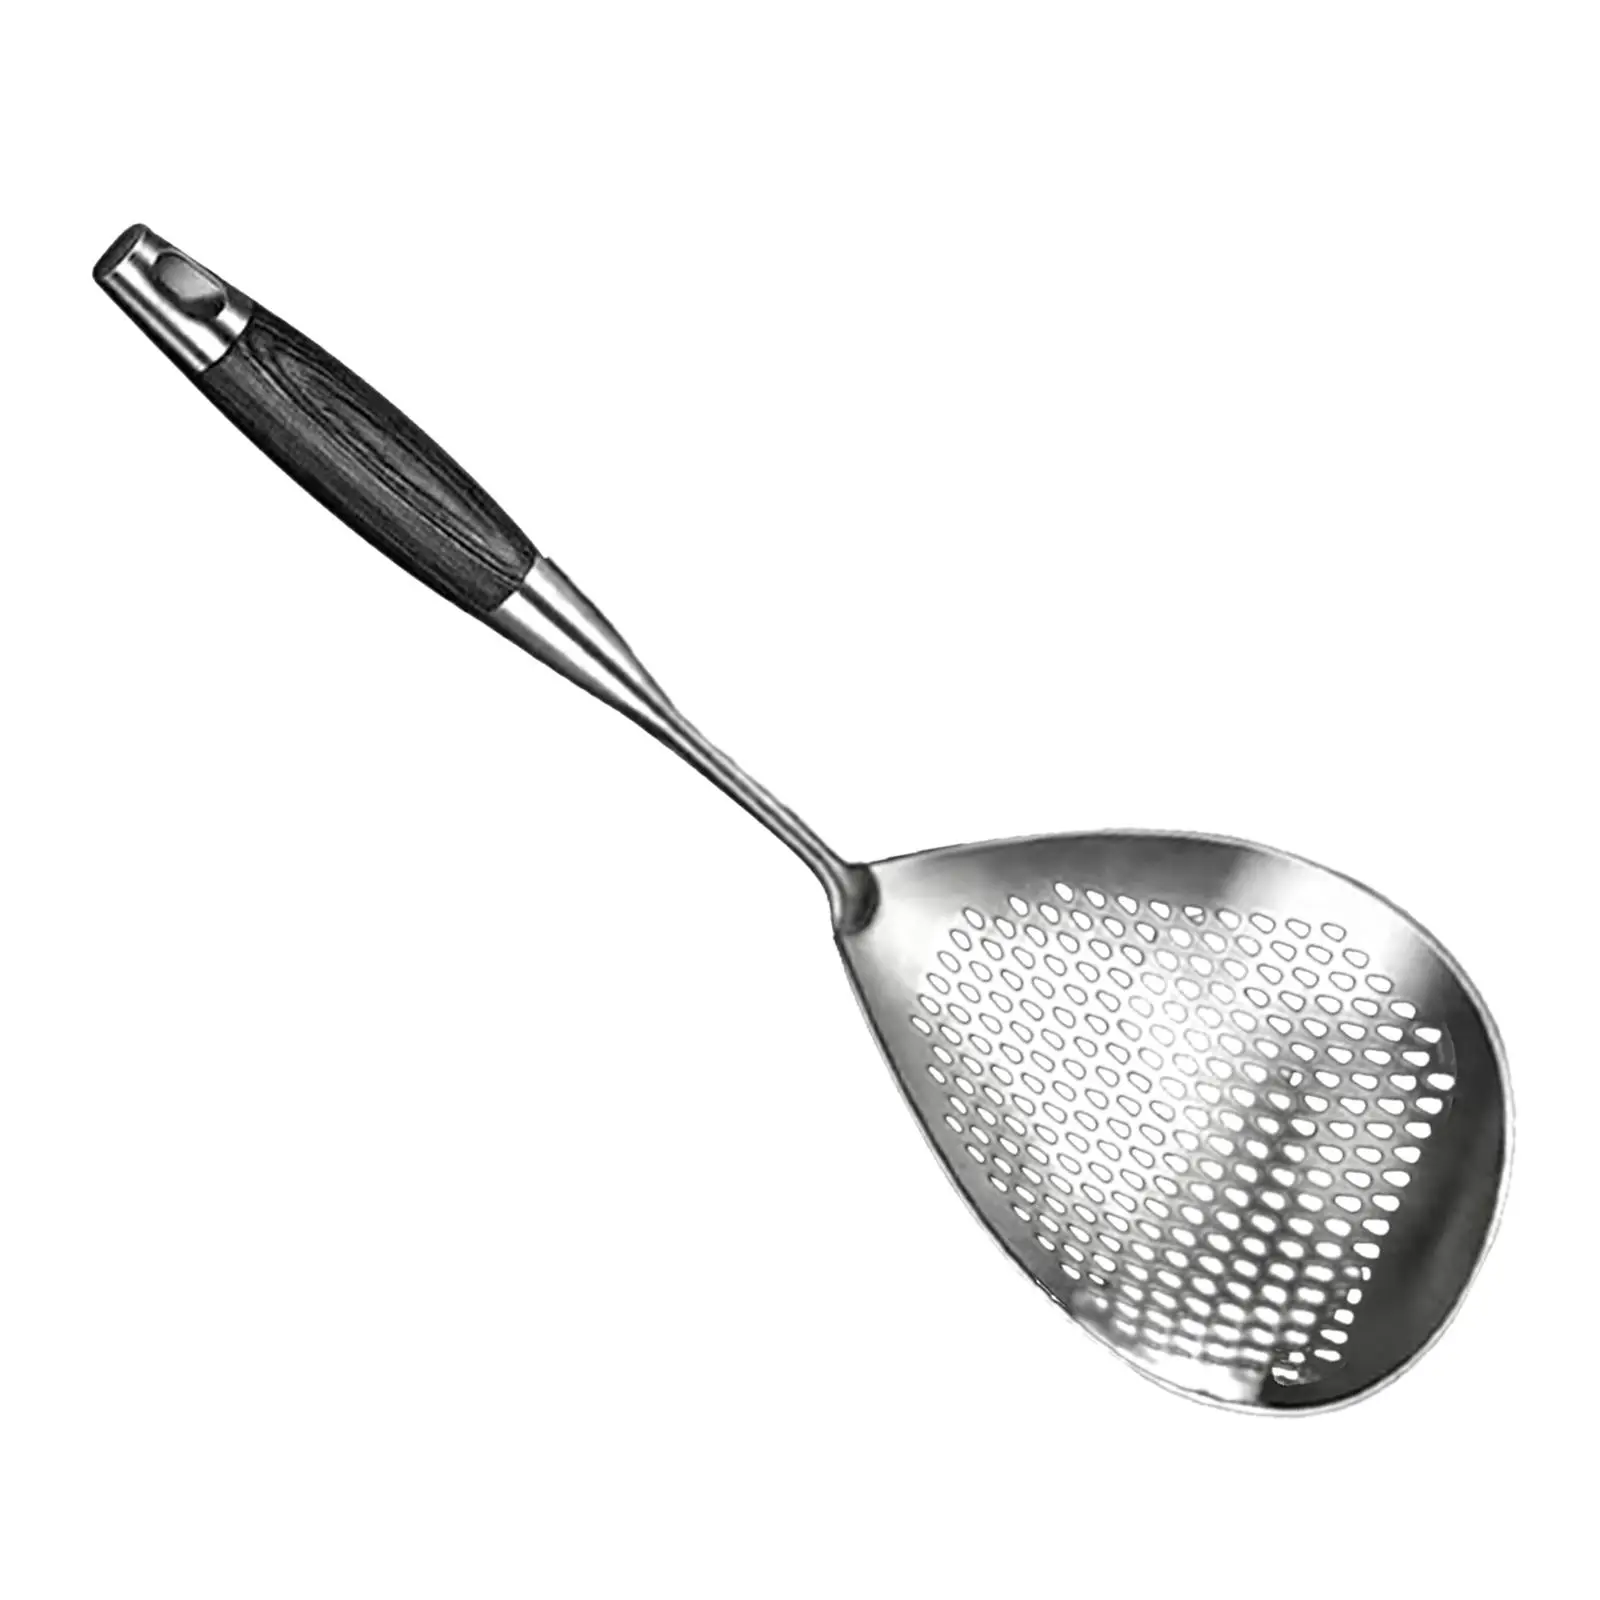 Skimmer Slotted Spoon Cooking Colander Pasta Spaghetti Drain Spoon Frying Spoon for French Fries Frying Cooking Noodles Baking